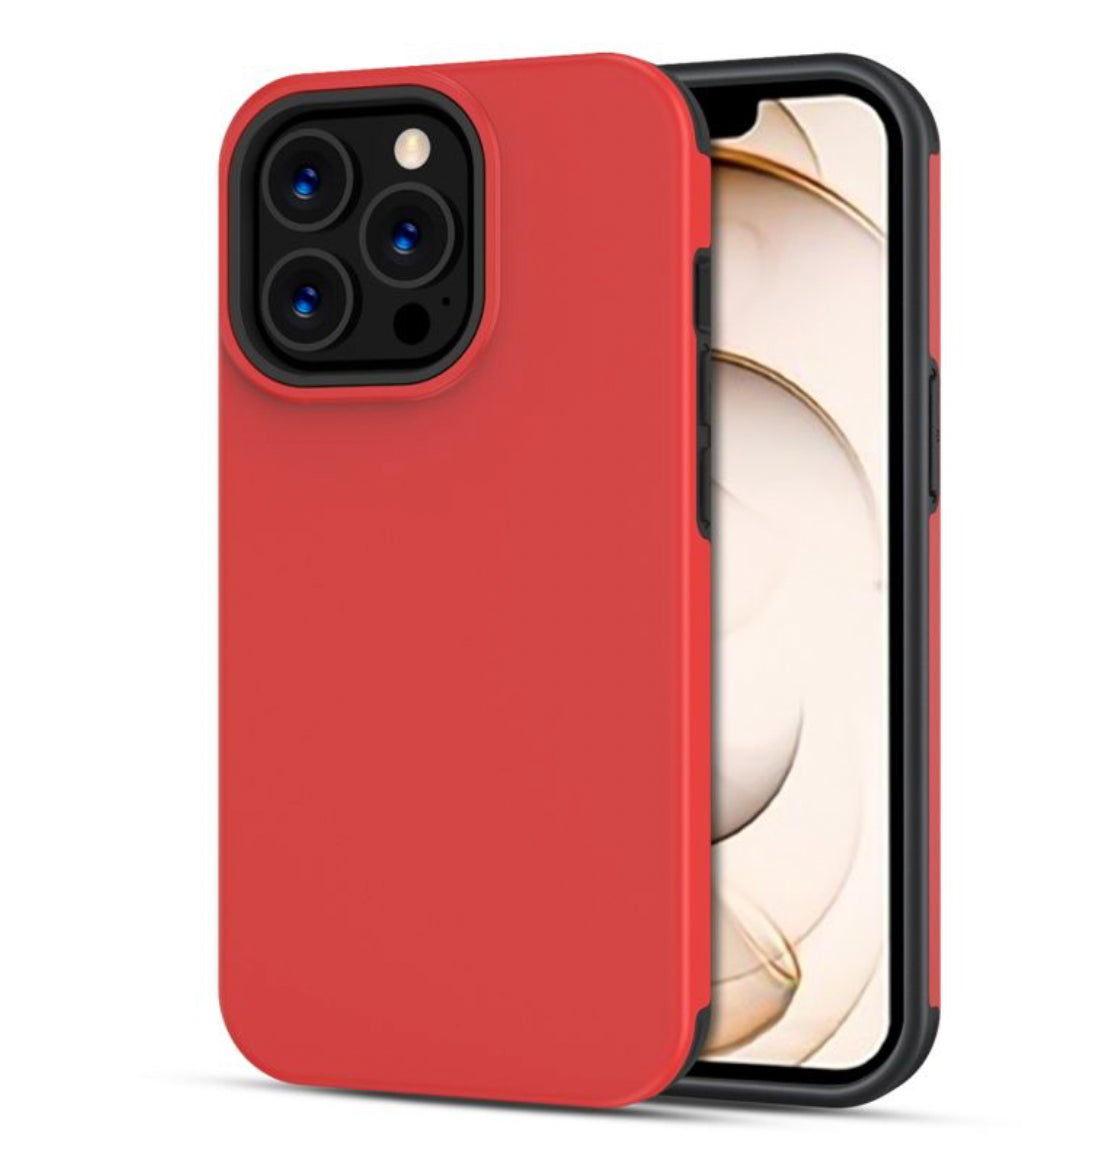 MYBAT PRO FUSE MAGNET SERIES CASE FOR APPLE IPHONE 13 PRO (6.1) - RED